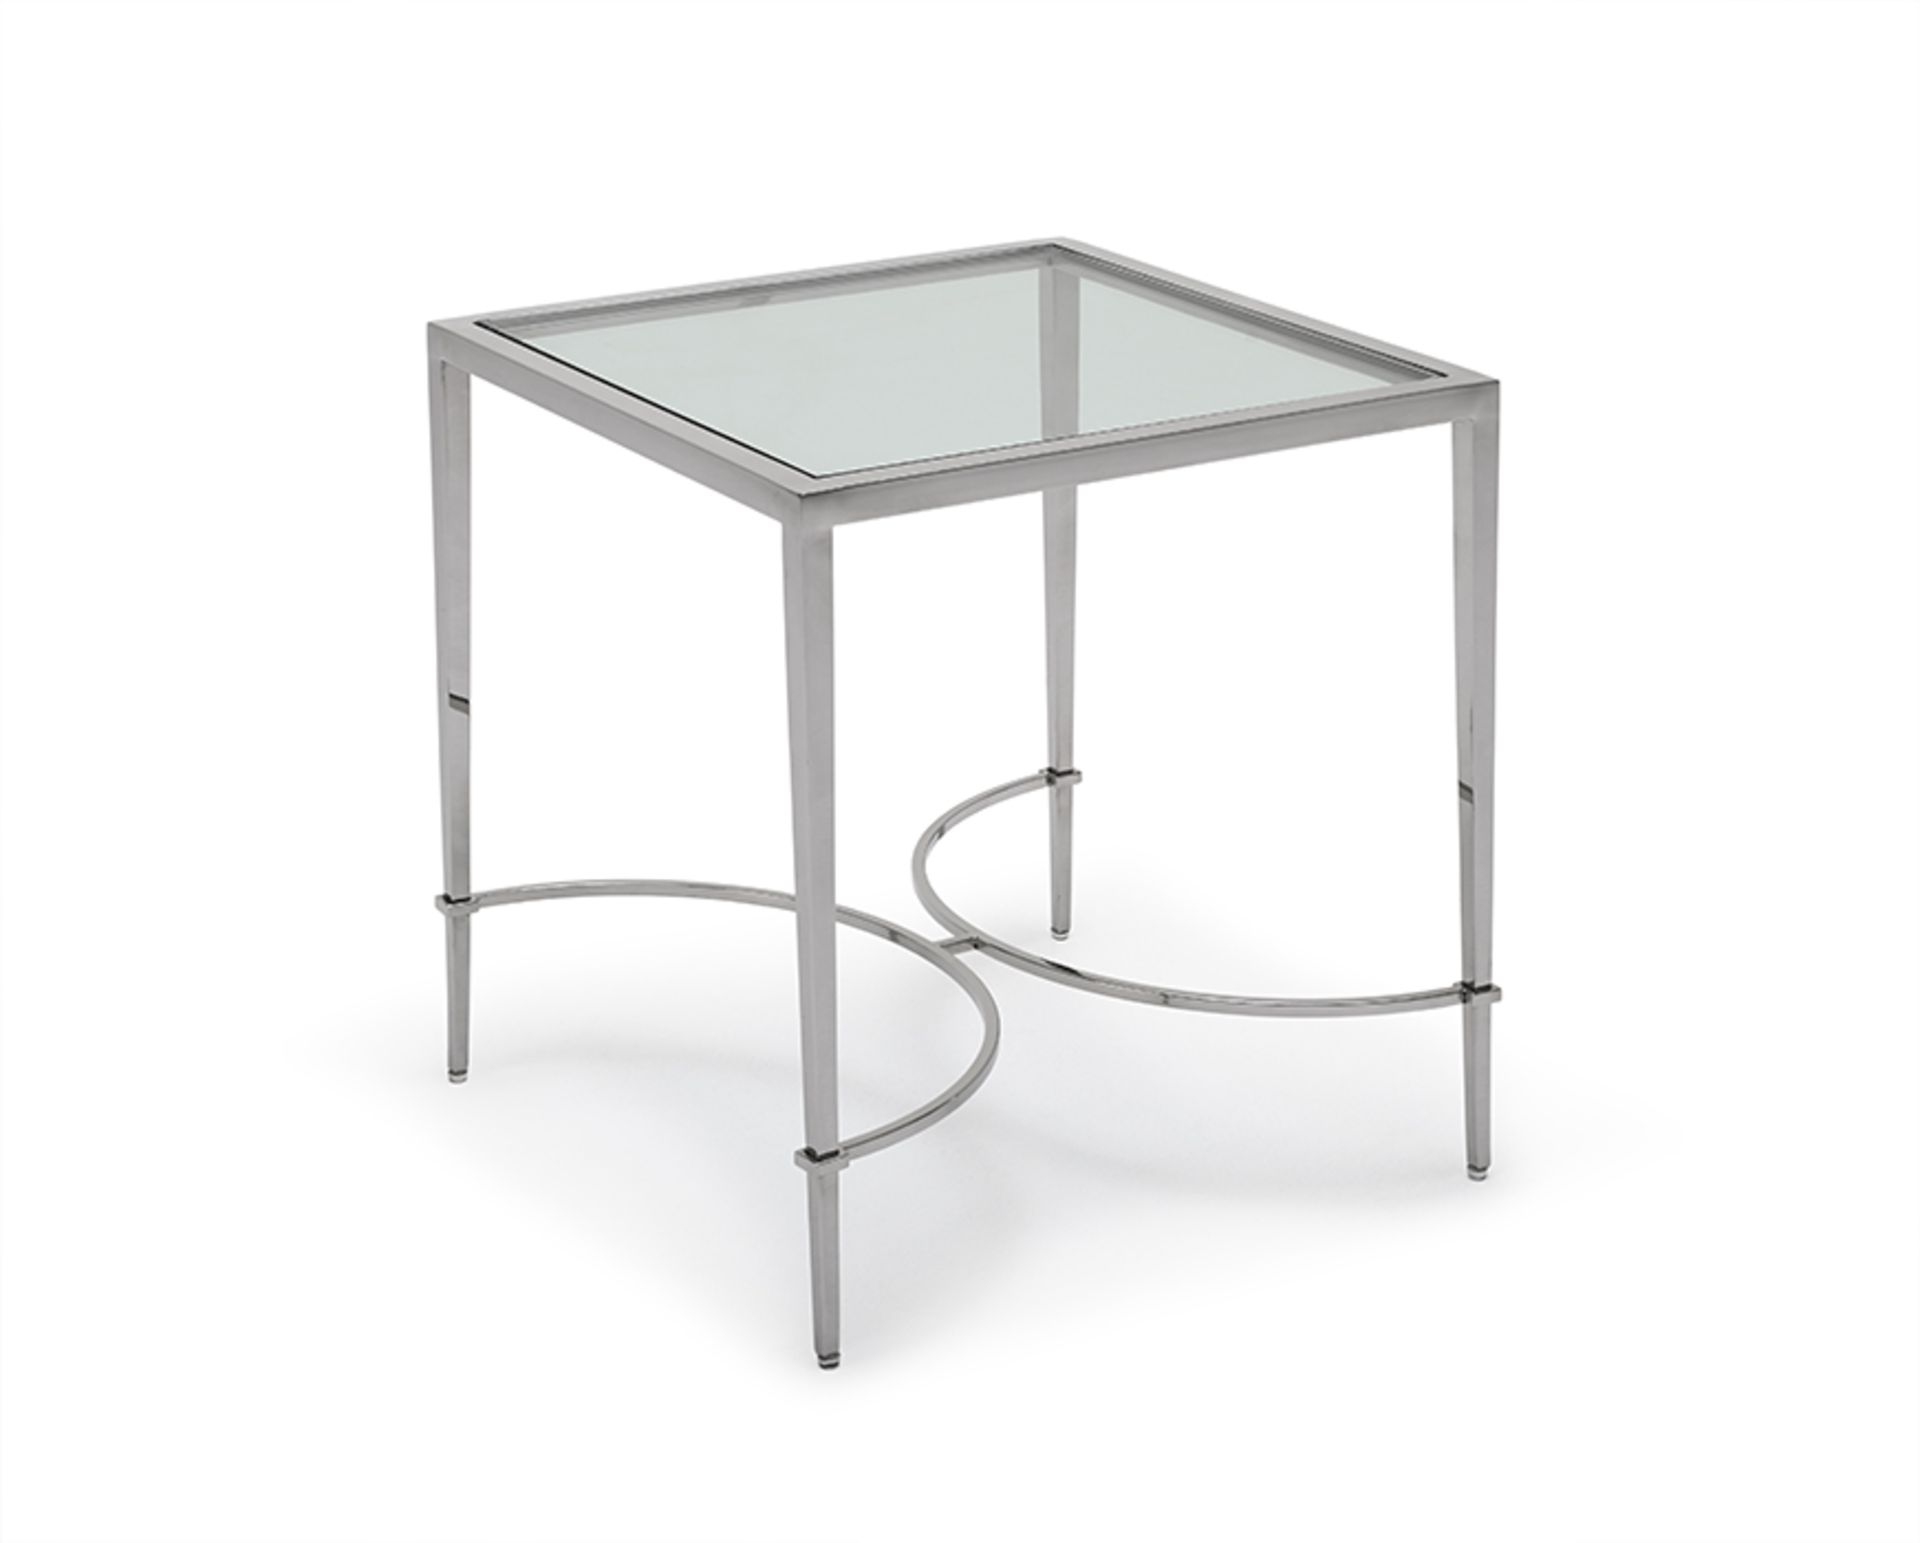 Tokyo Lamp Table by Kesterport The Tokyo lamp table with its clear glass top and a refined tapered - Bild 5 aus 5